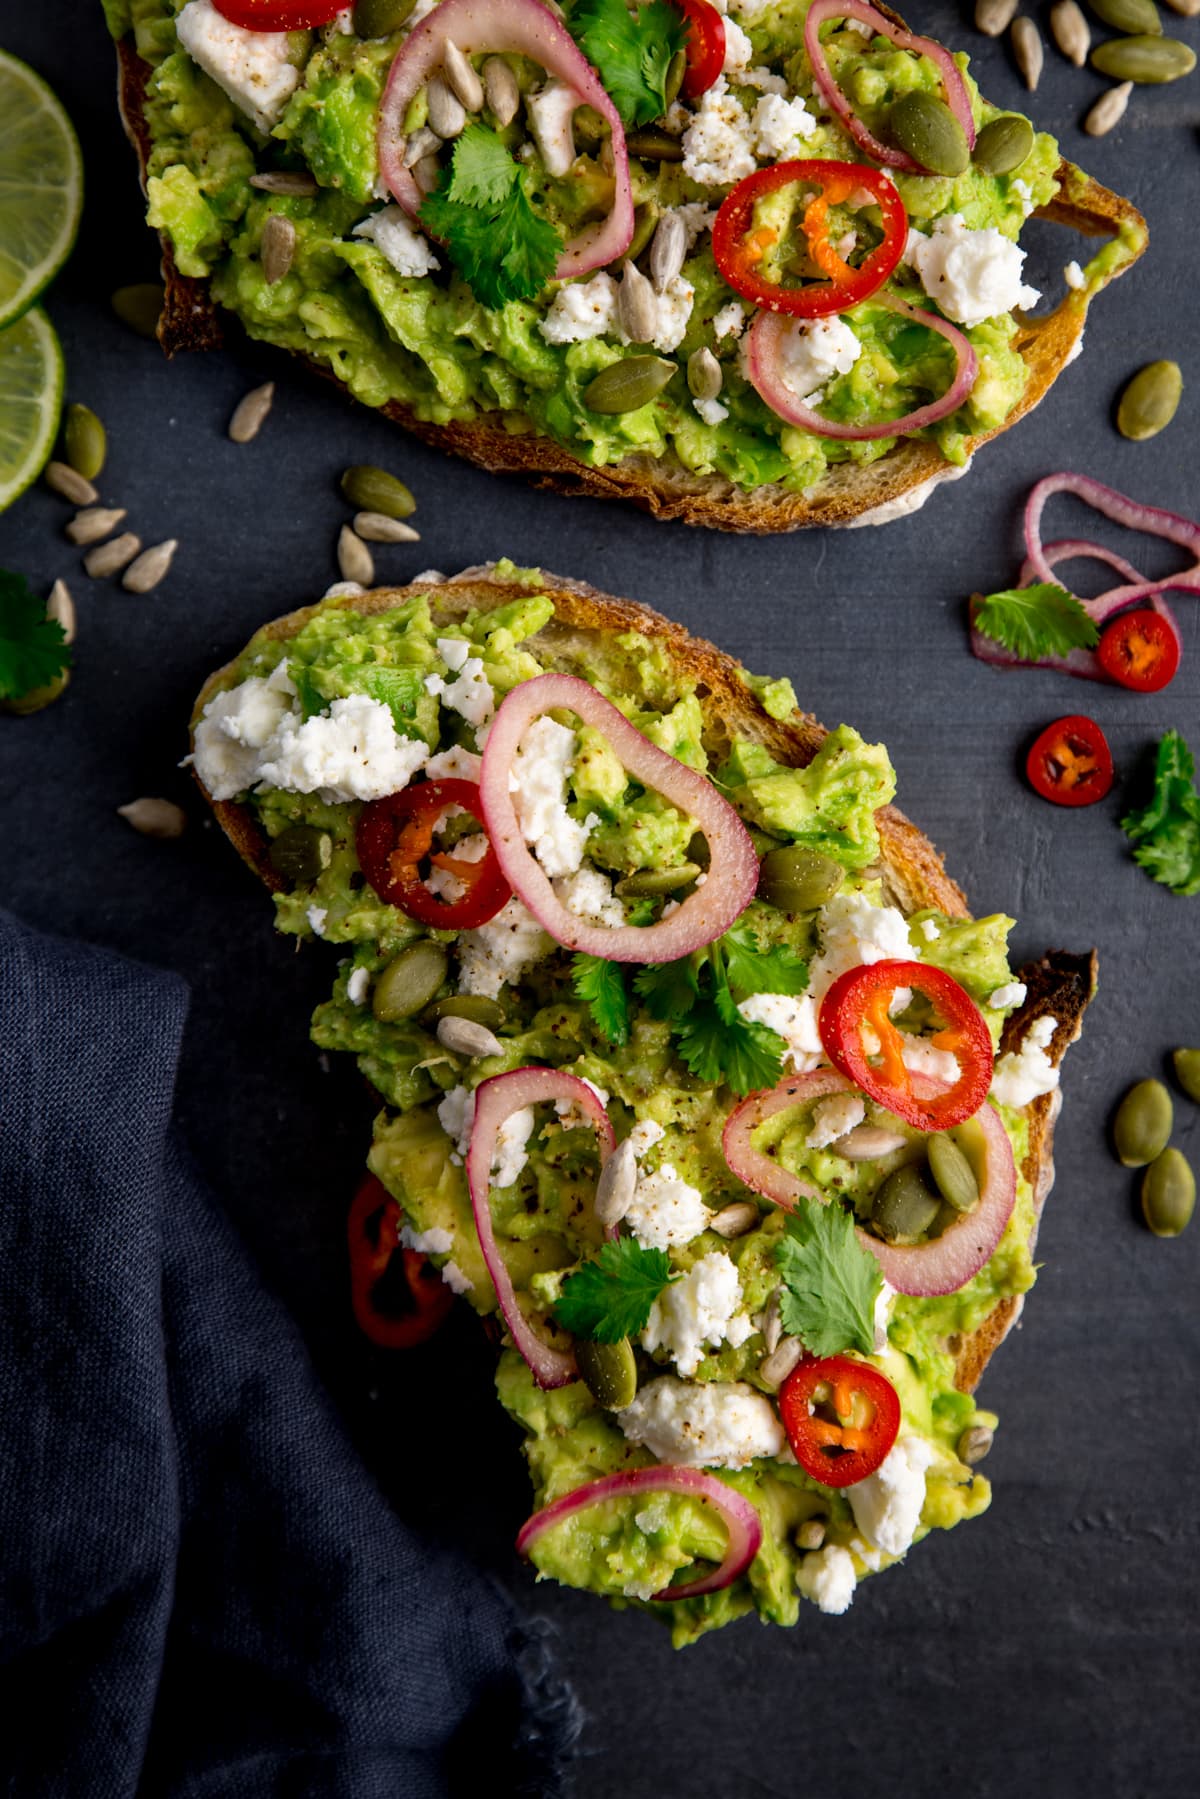 Two pieces of loaded avocado toast with feta, shallot, sliced red chilli, seeds and coriander (cilantro) on a dark grey background. There are ingredients scattered around and a dark grey napkin on the left of the frame.